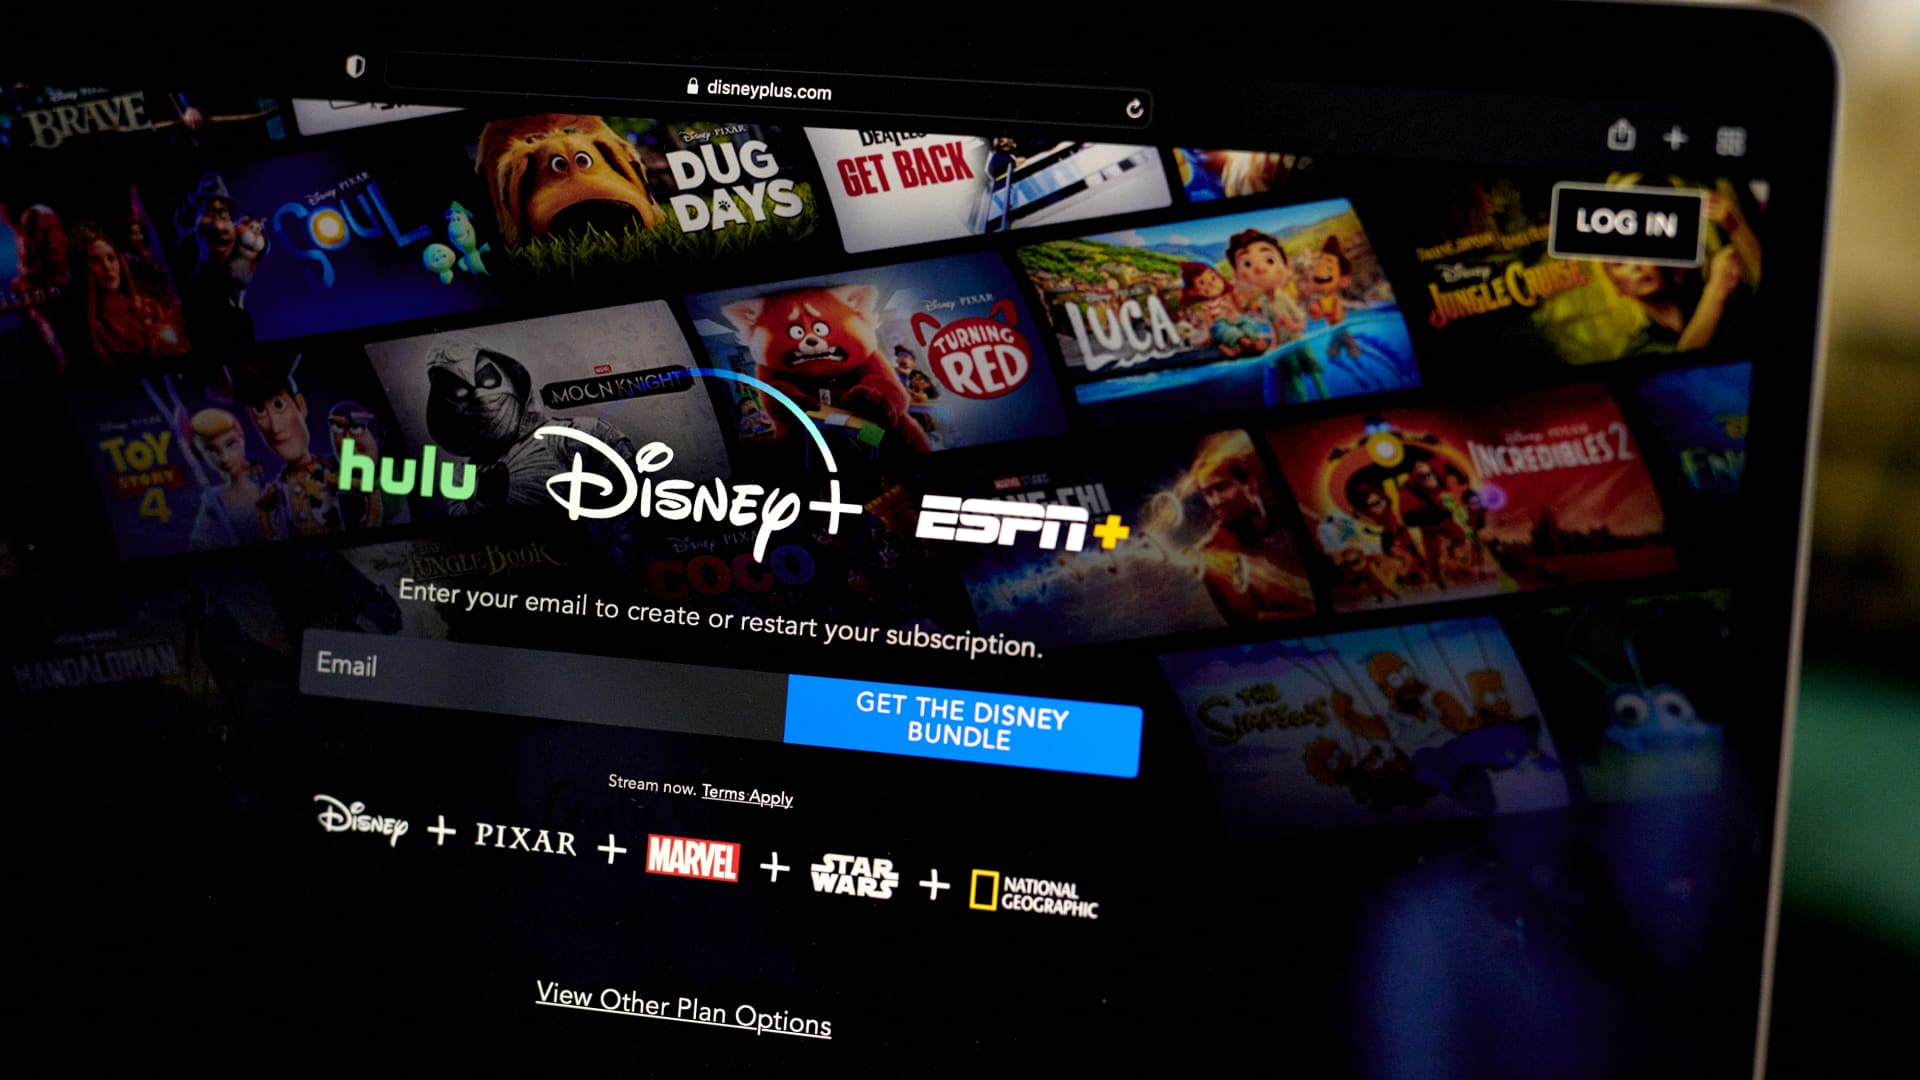 Disney raising prices of Disney+, Hulu ad-free plans for 2nd time in a year